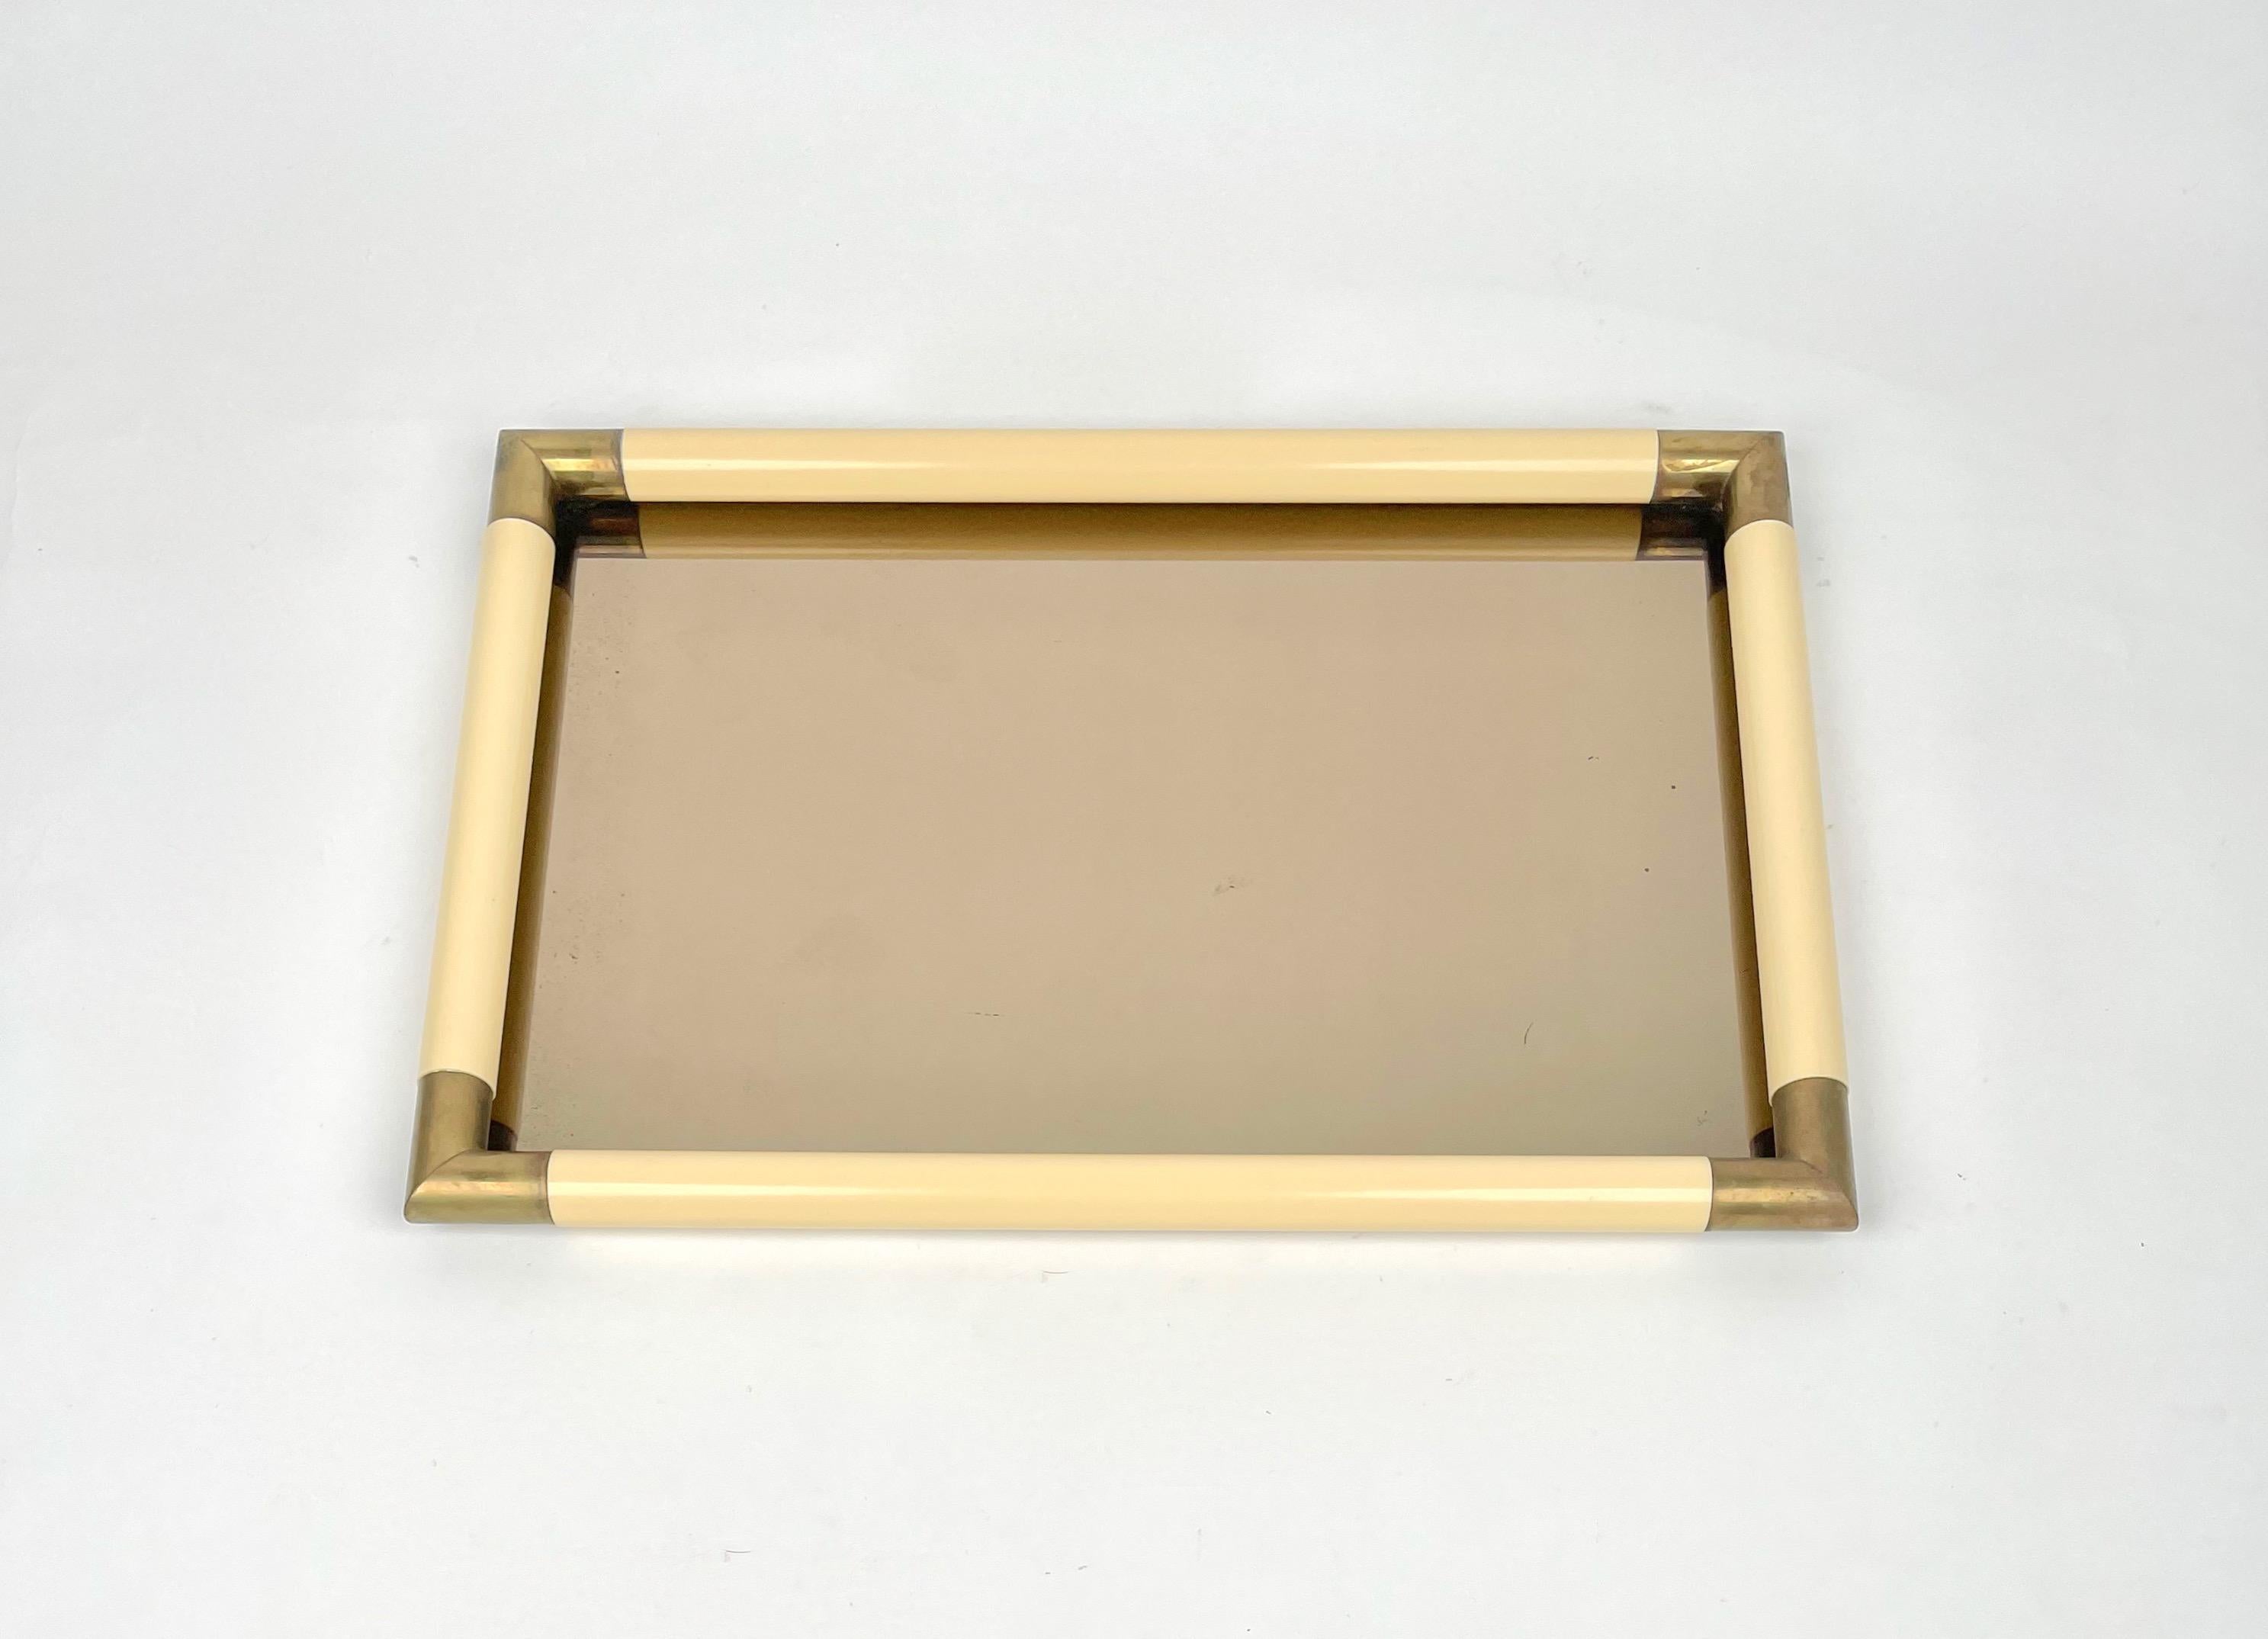 Rectangular centerpiece tray in bronzed mirror with brass corners and frame in ivory-colored plastic material by the Italian designer Tommaso Barbi. 

Made in Italy in the 1970s.